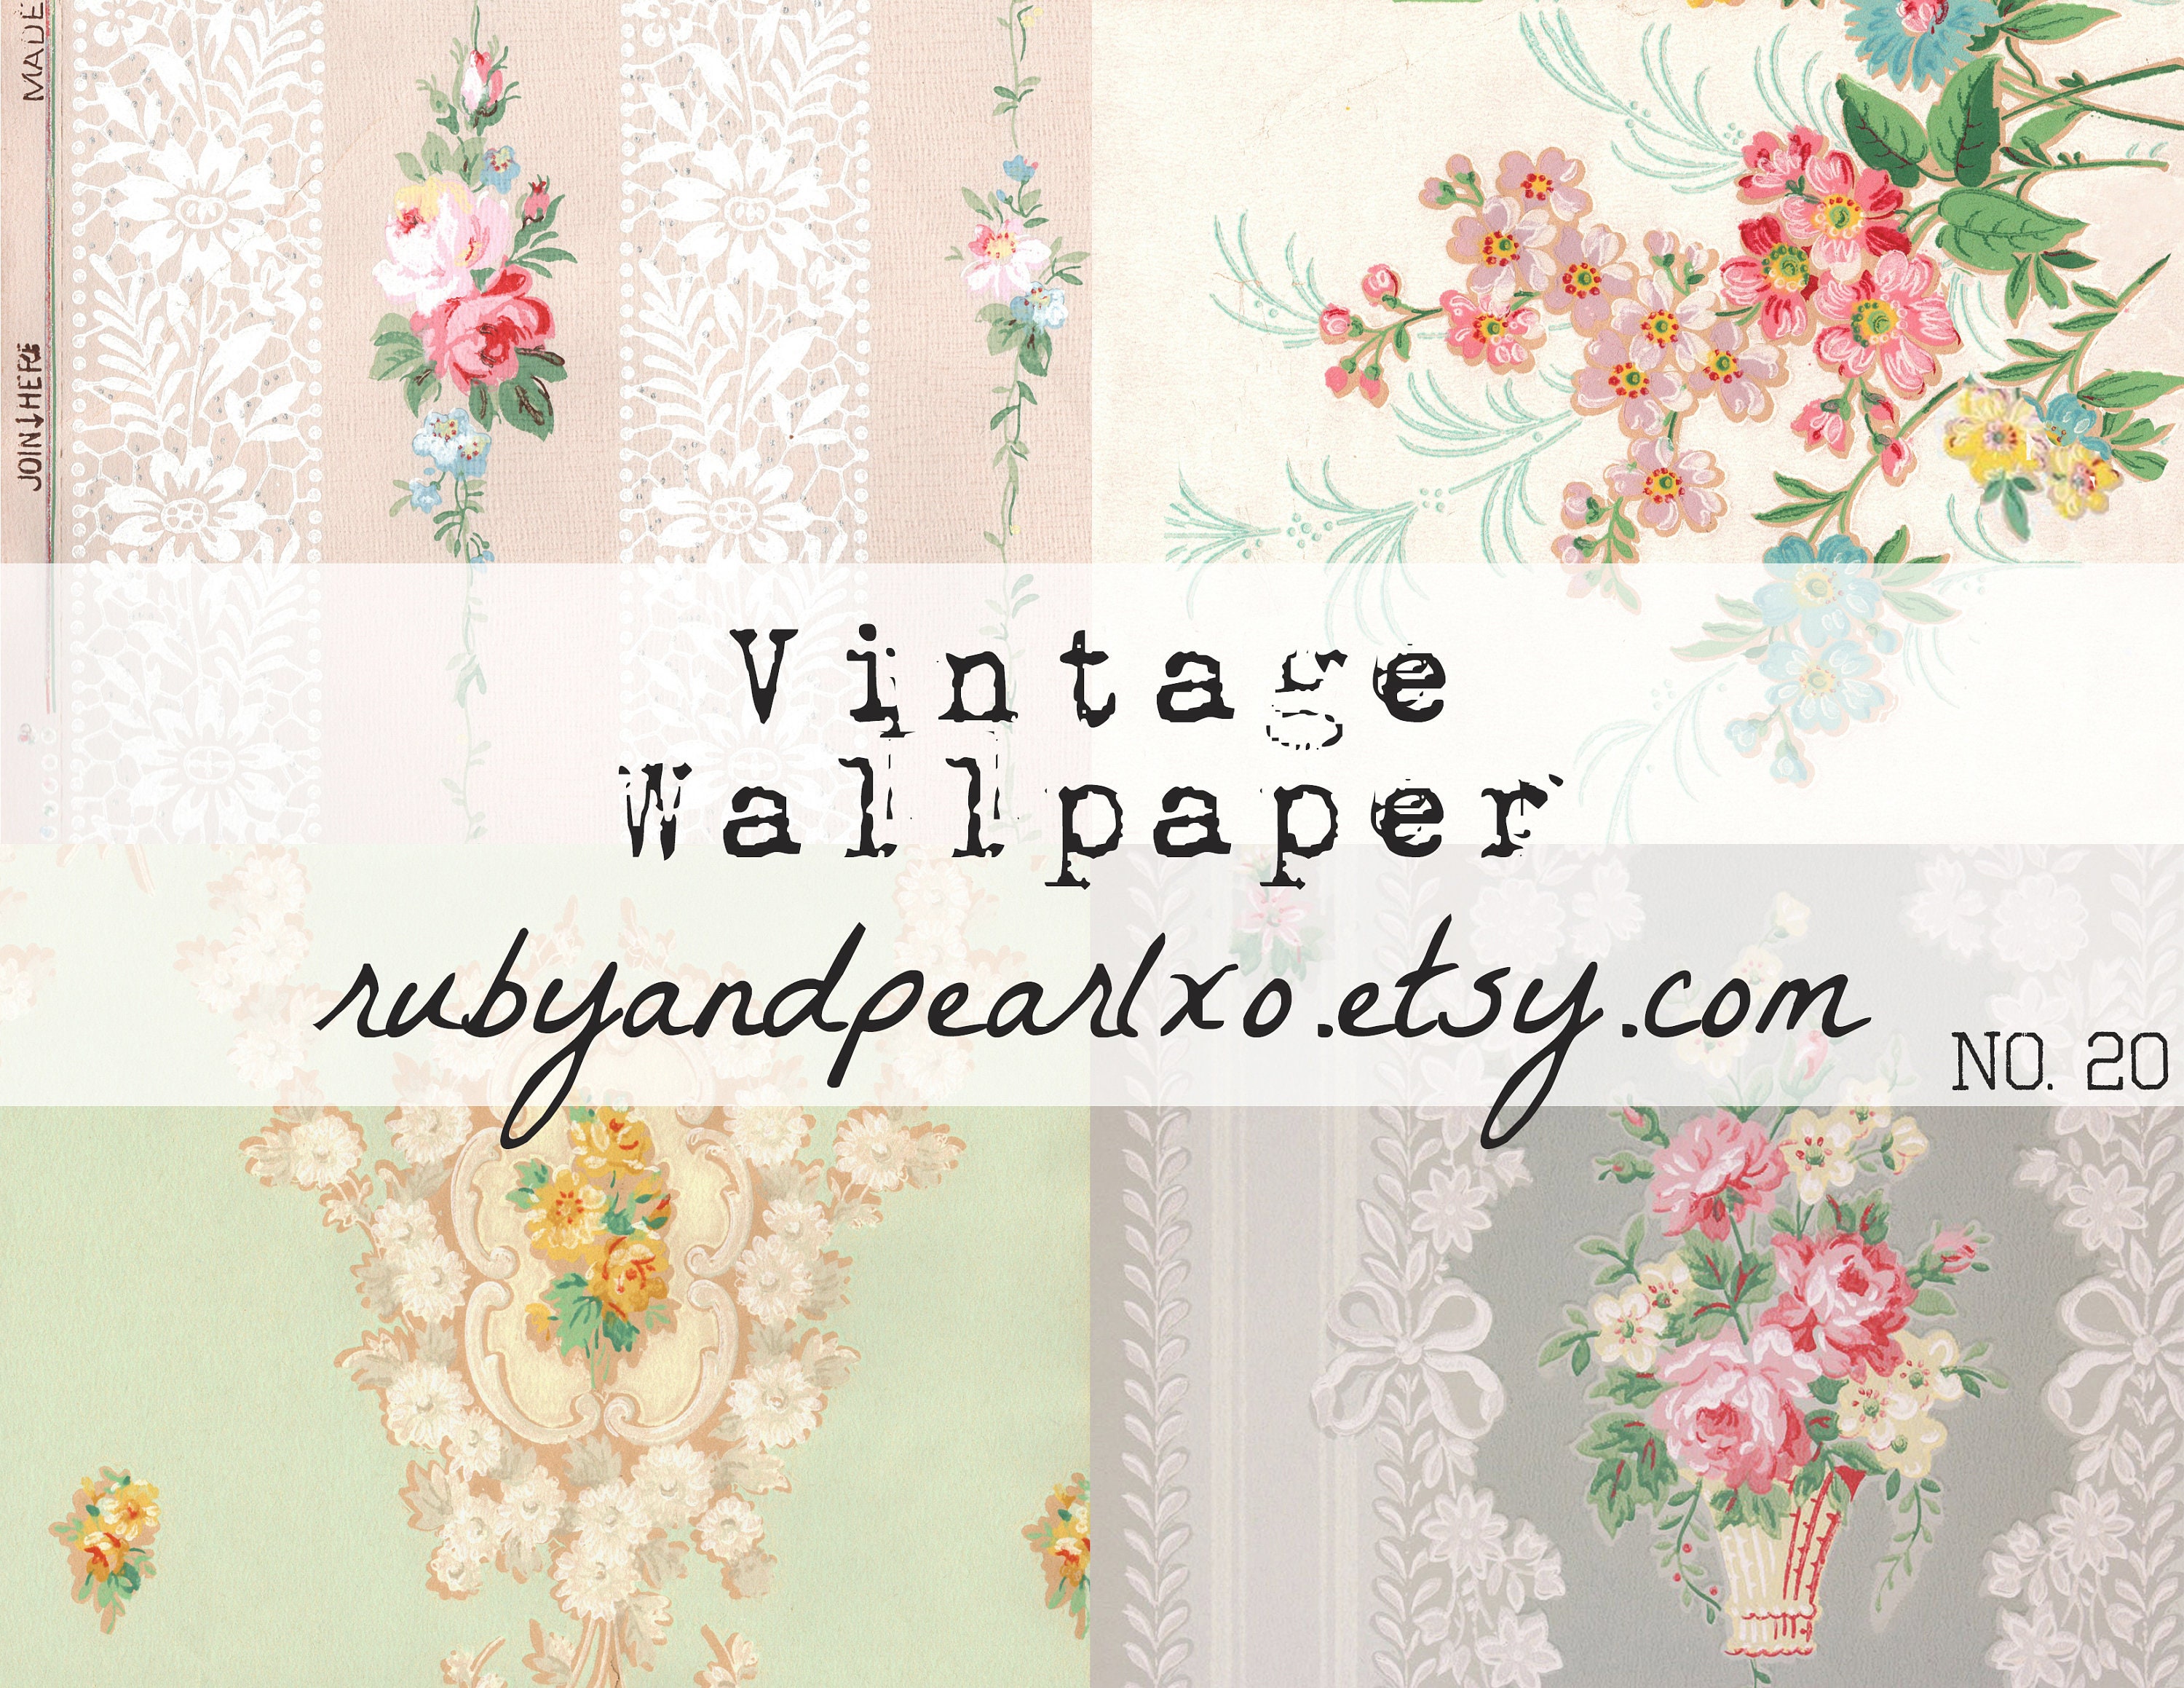 Original Wallpaper Remnants Tagged date1920s  Bolling  Company